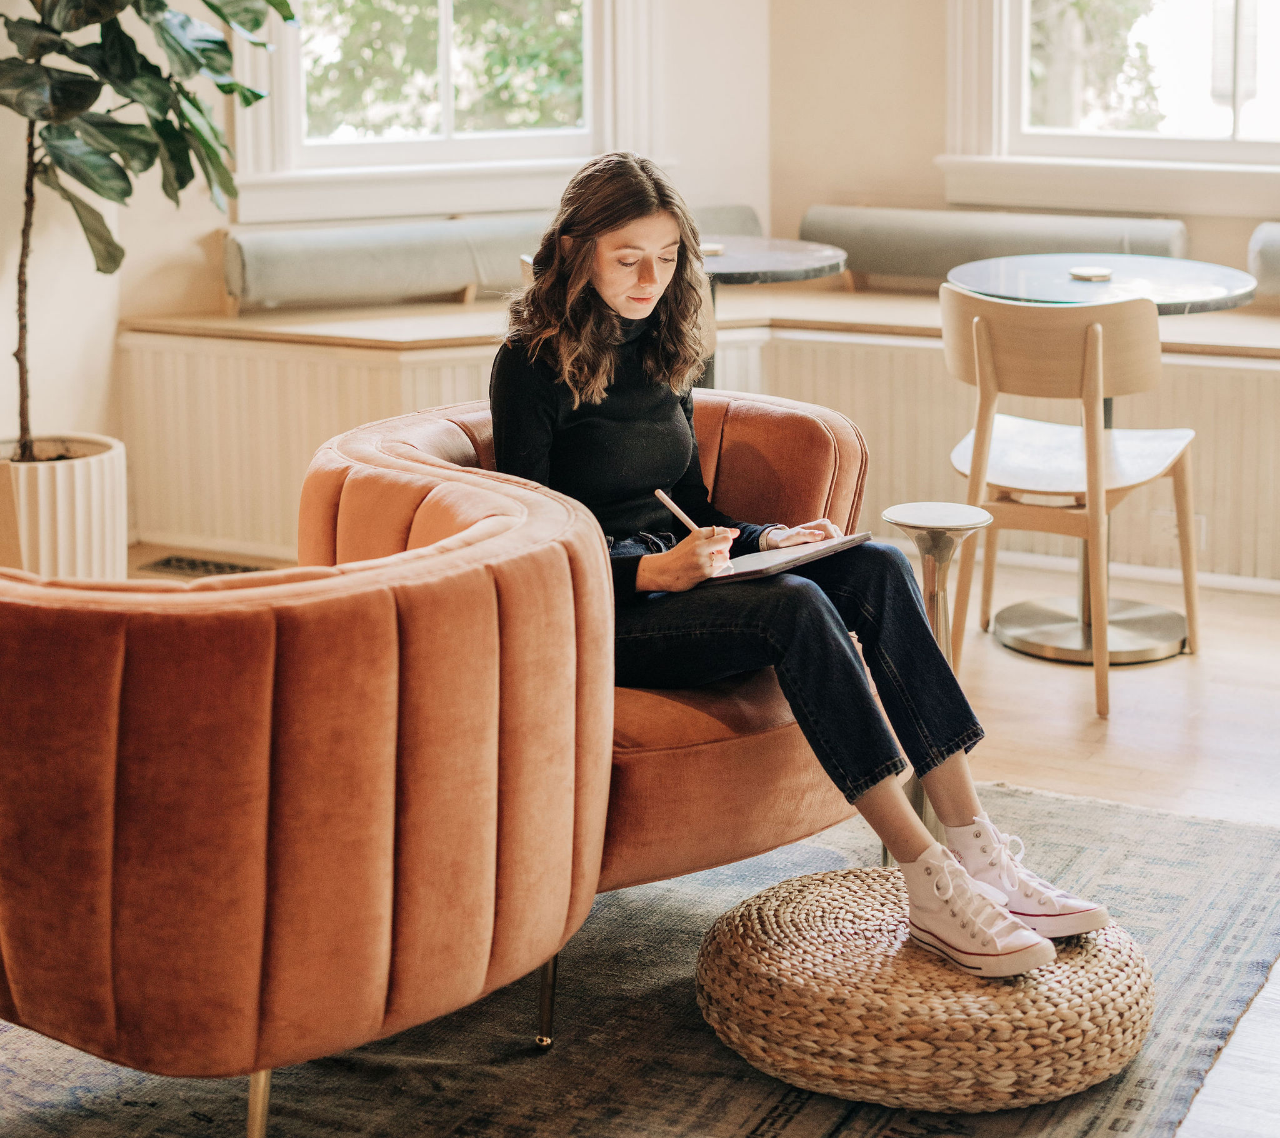 Kirstin from KDigitalStudio is sitting on a conversation couch with her feet propped up on a boho-style poof. She has her iPad in her lap and is writing on it with the Apple Pencil.